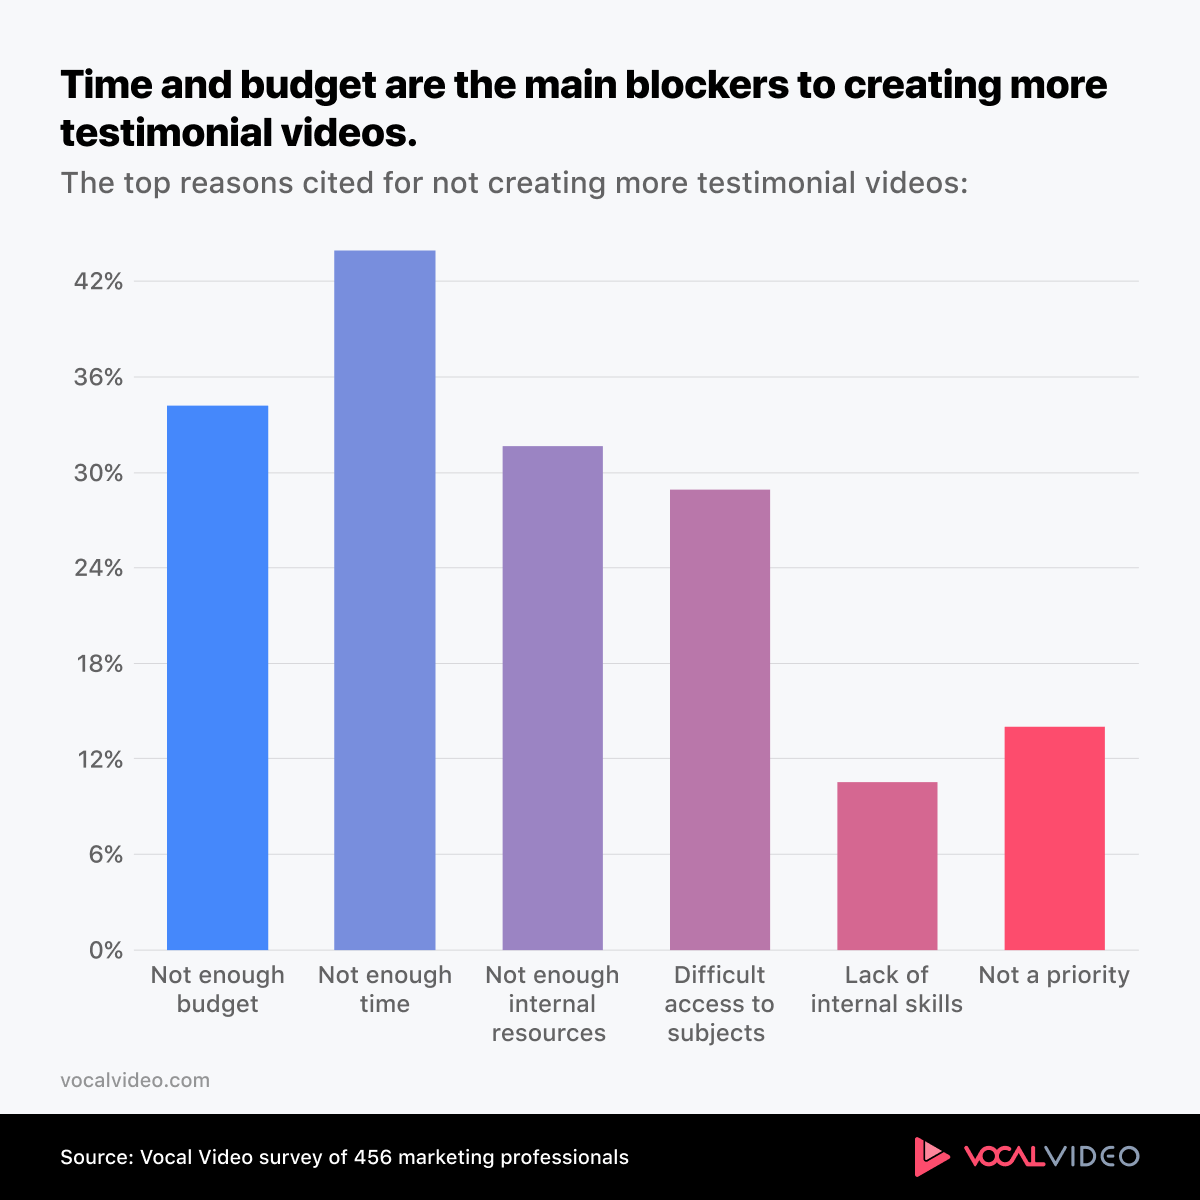 Time and budget are the main blockers to creating more testimonial videos.